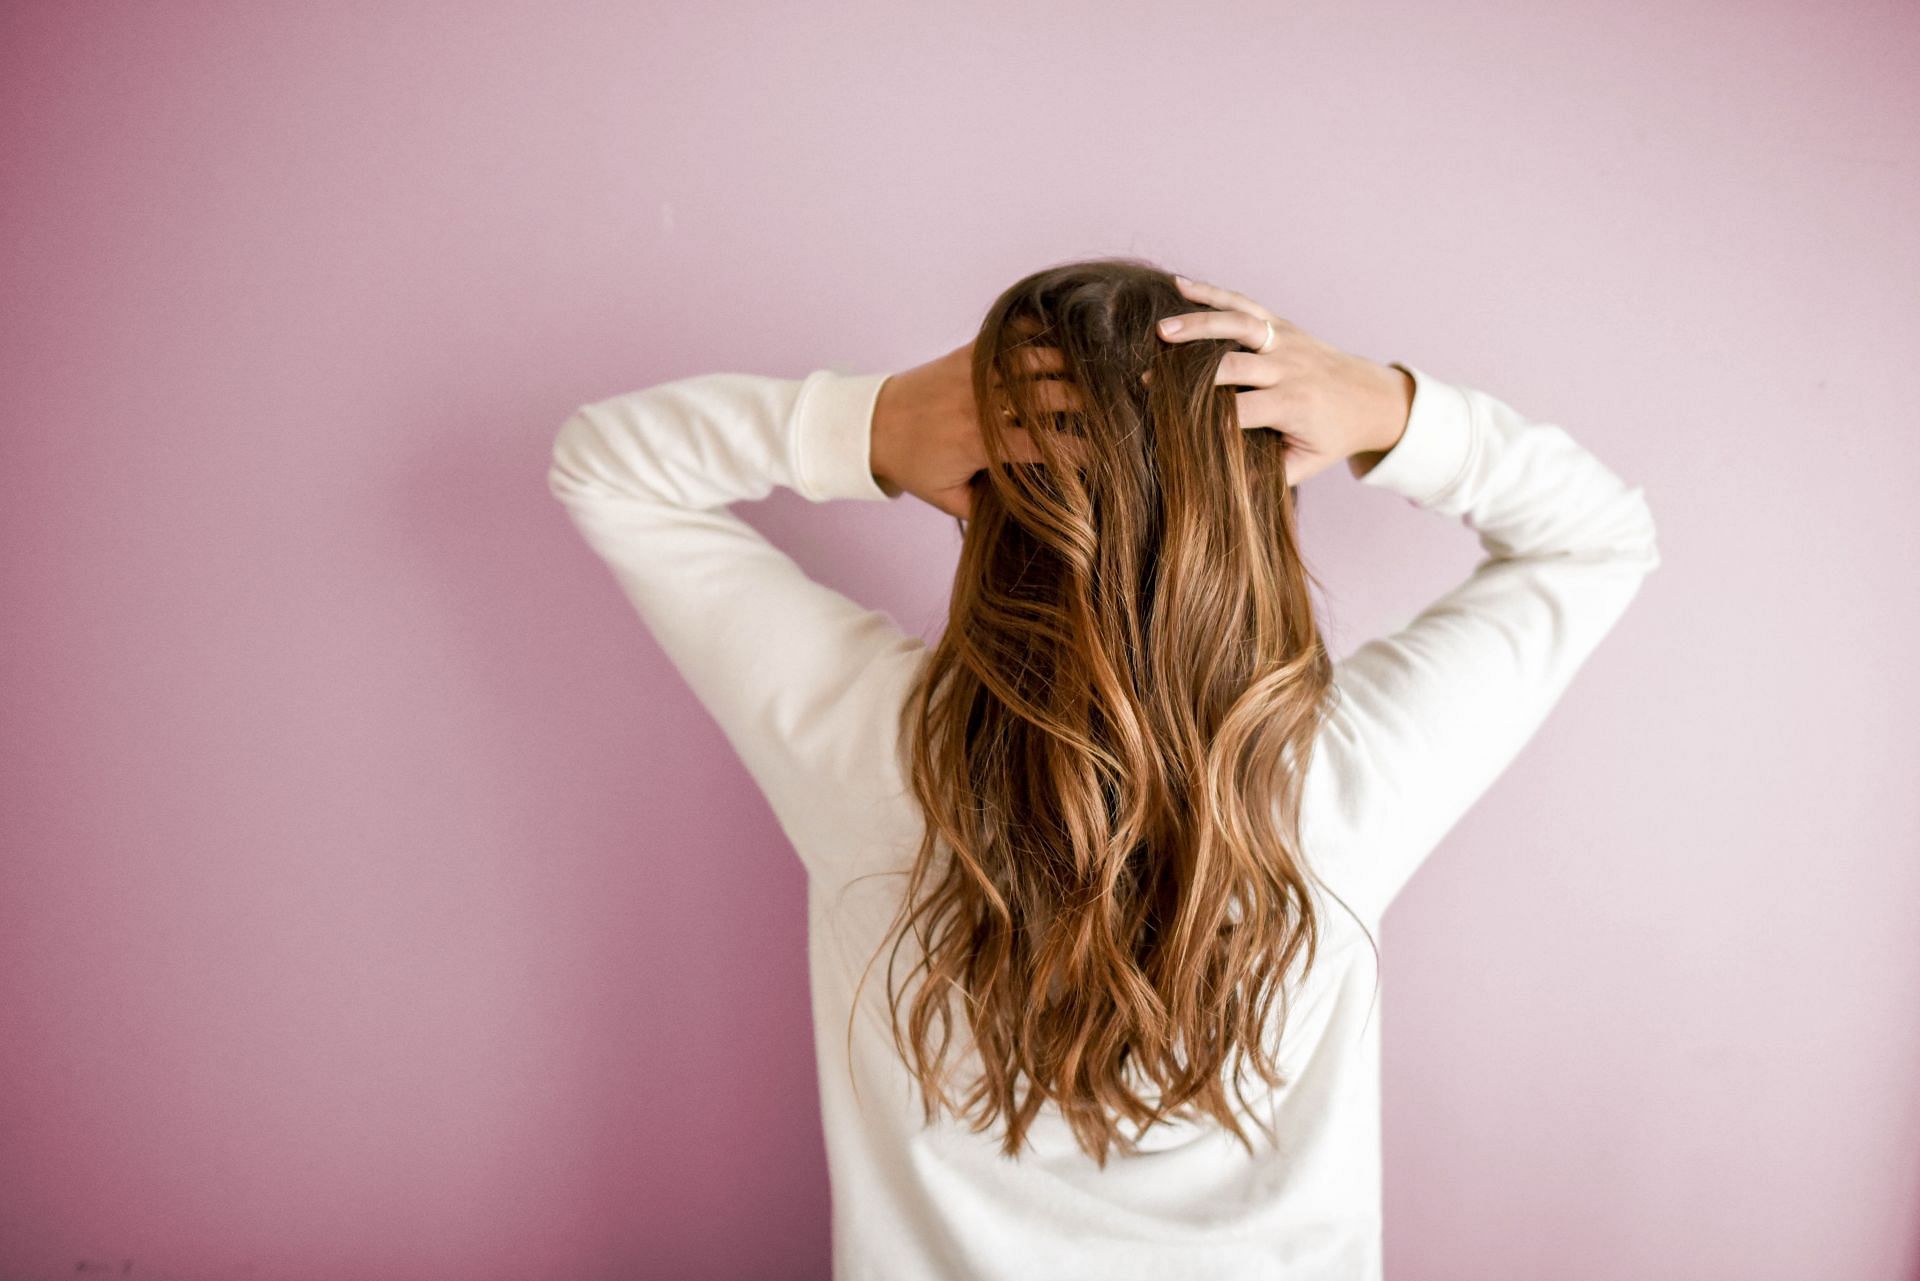 Iron deficiency is a major cause of hair loss. (Image via Unsplash/ Element5 digital)